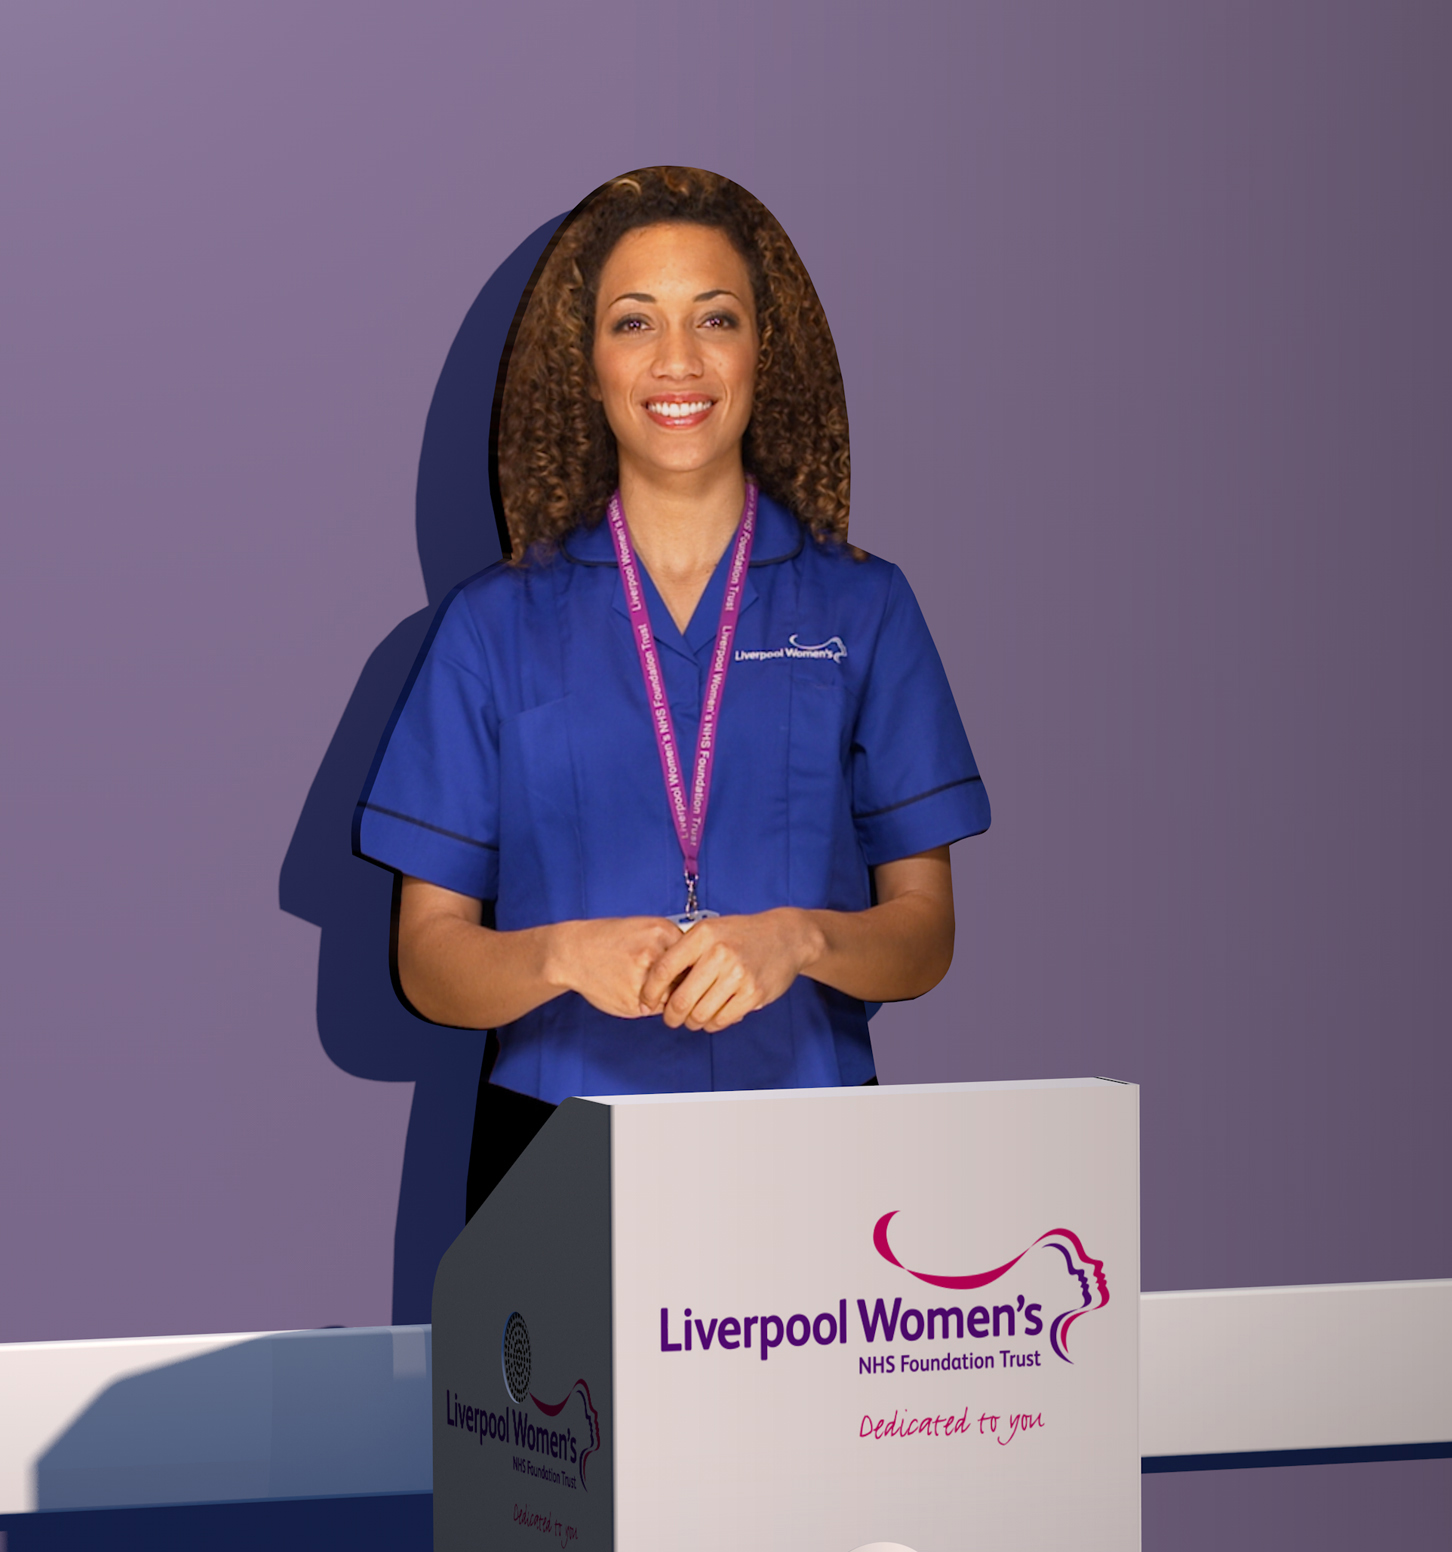 The Tensator Virtual Assistant installed in Liverpool Women's hospital to improve patient experience and infection control